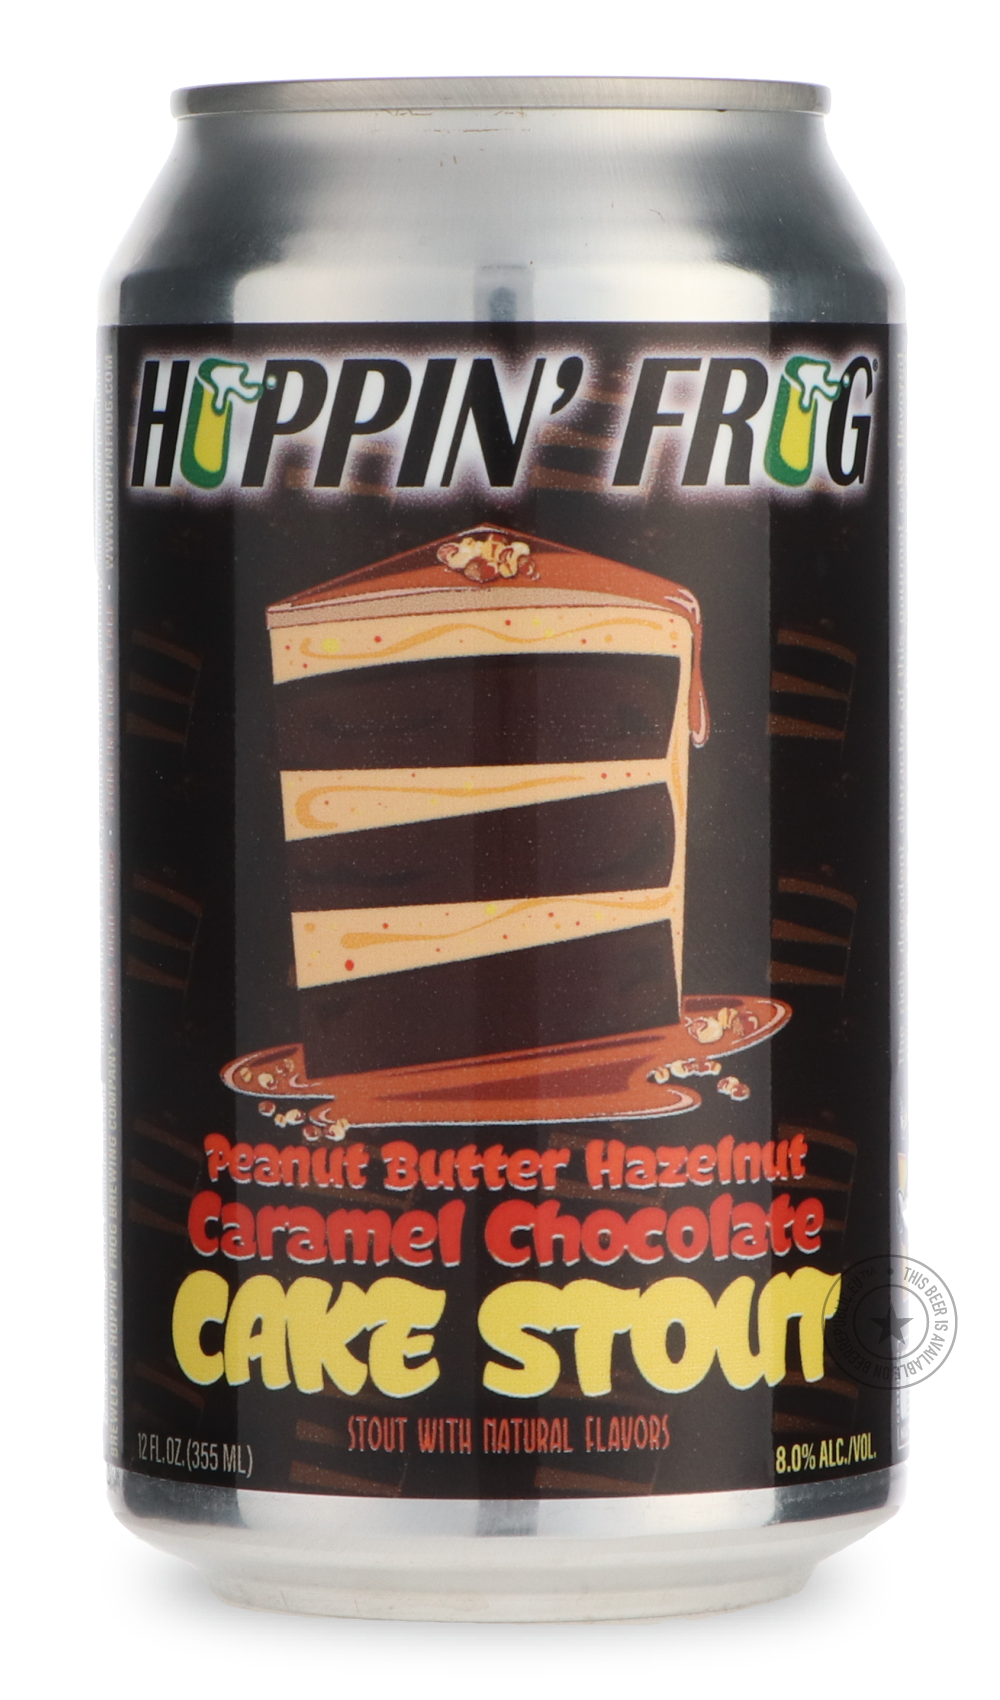 -Hoppin' Frog- Peanut Butter Hazelnut Caramel Chocolate Cake Stout-Stout & Porter- Only @ Beer Republic - The best online beer store for American & Canadian craft beer - Buy beer online from the USA and Canada - Bier online kopen - Amerikaans bier kopen - Craft beer store - Craft beer kopen - Amerikanisch bier kaufen - Bier online kaufen - Acheter biere online - IPA - Stout - Porter - New England IPA - Hazy IPA - Imperial Stout - Barrel Aged - Barrel Aged Imperial Stout - Brown - Dark beer - Blond - Blonde 